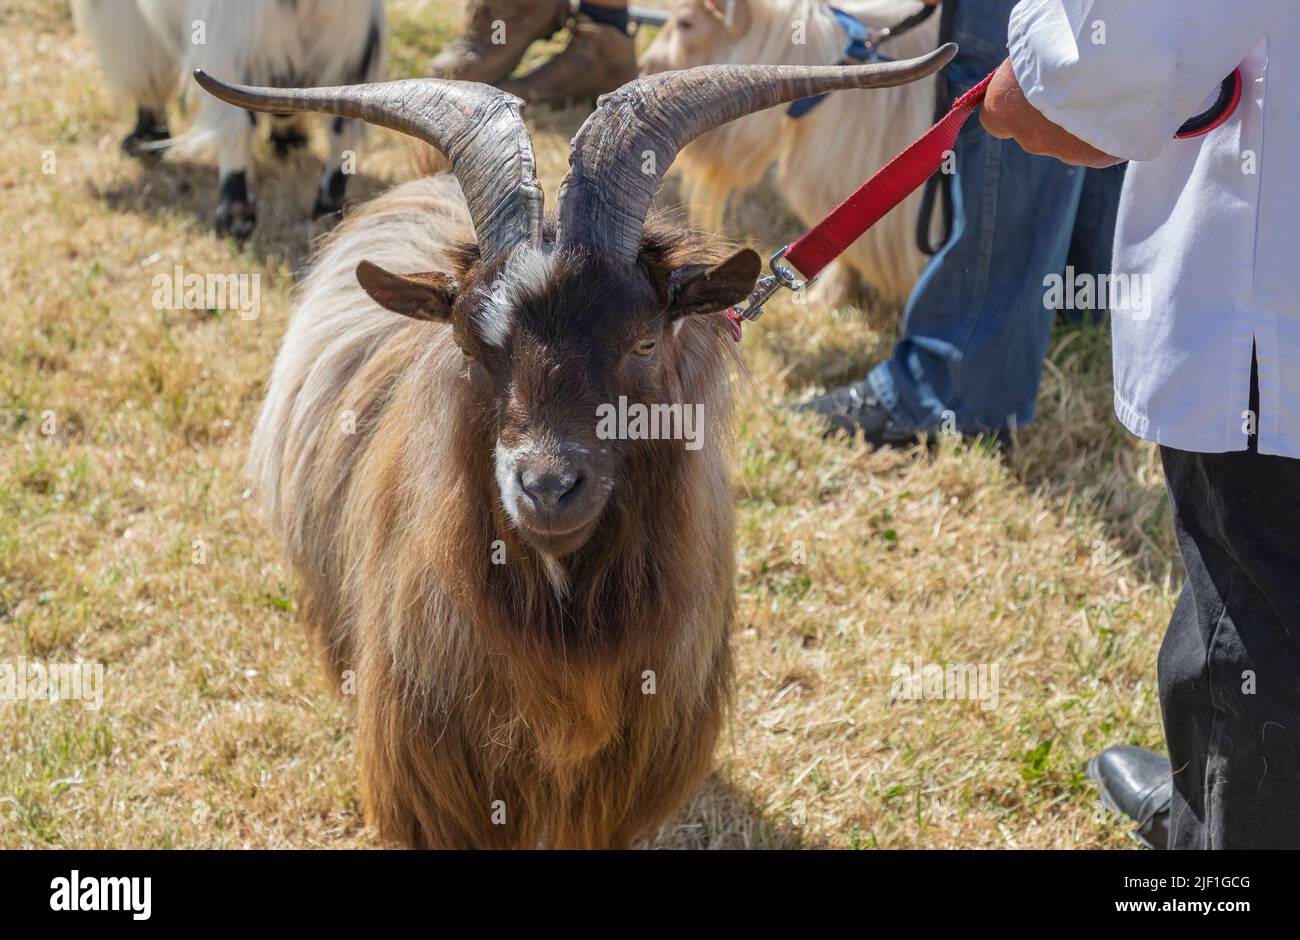 Brown long haired goat with huge horns being led on a red lead at a county show Stock Photo